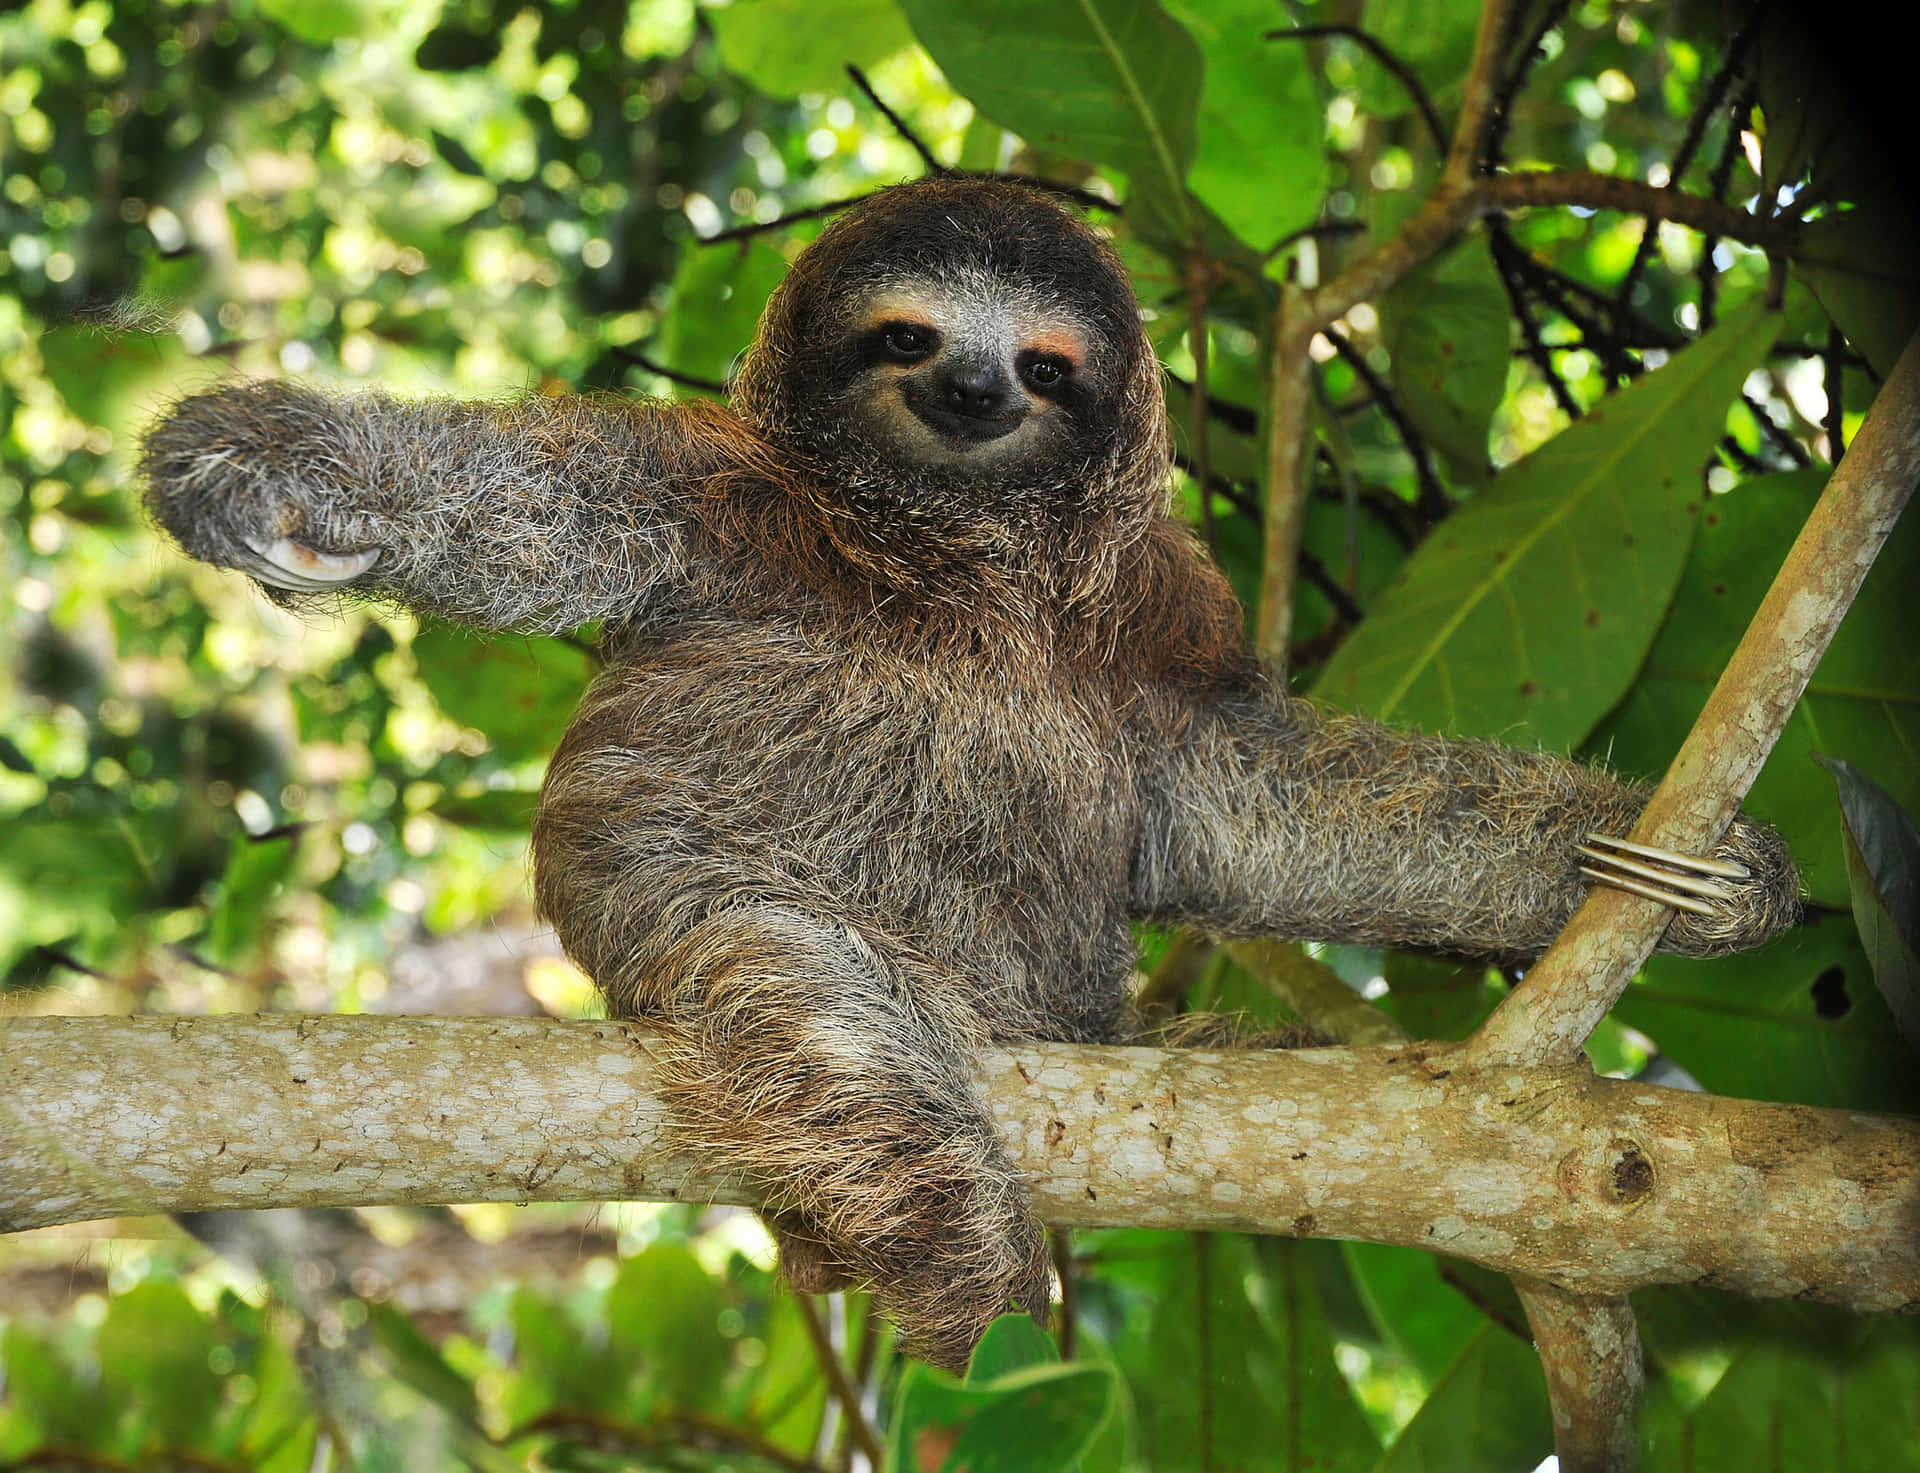 Cuddle up with this adorable Sloth